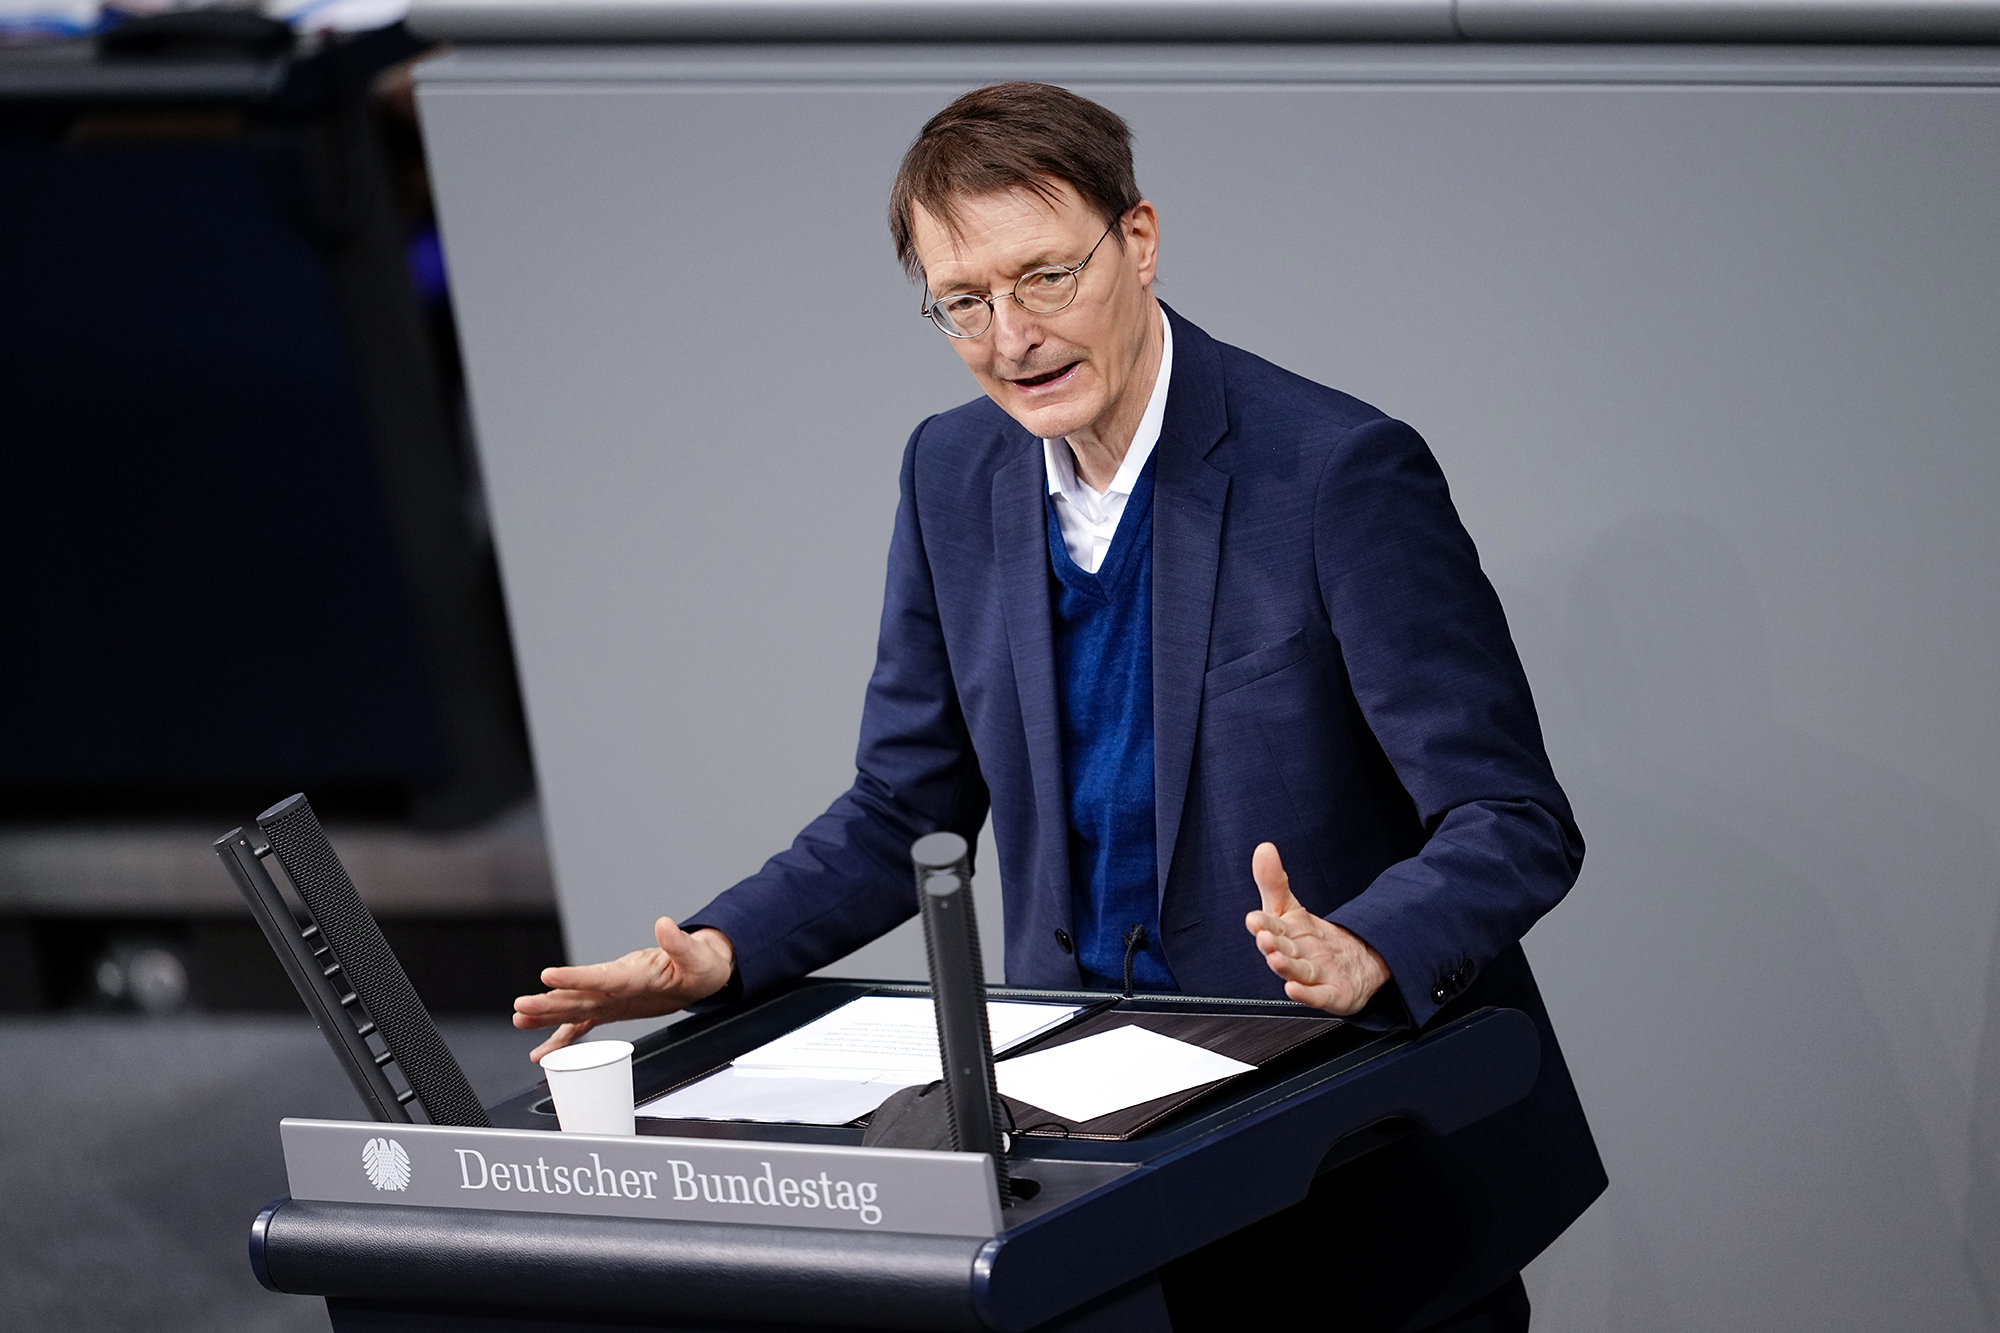 13 January 2022, Berlin: Karl Lauterbach (SPD), Federal Minister of Health, speaks during the three-day debate on the policies of the traffic light coalition in the Bundestag, Berlin, Germany on 13 January 2022.